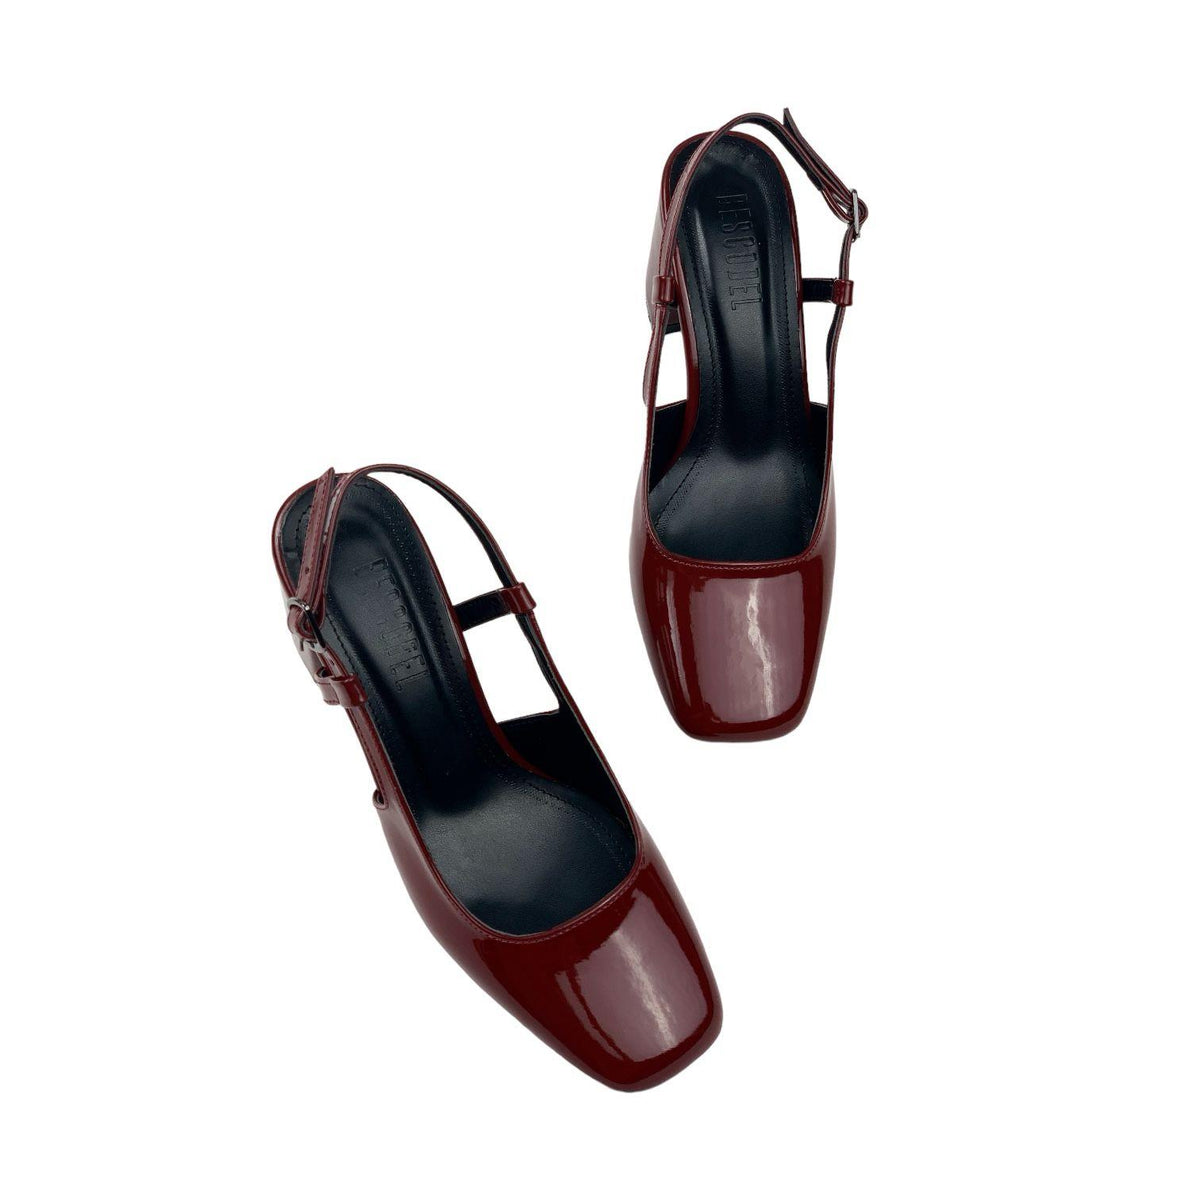 Women's Collar Claret Red Patent Leather Round Toe Open Back Sandals 8 Cm - STREETMODE ™